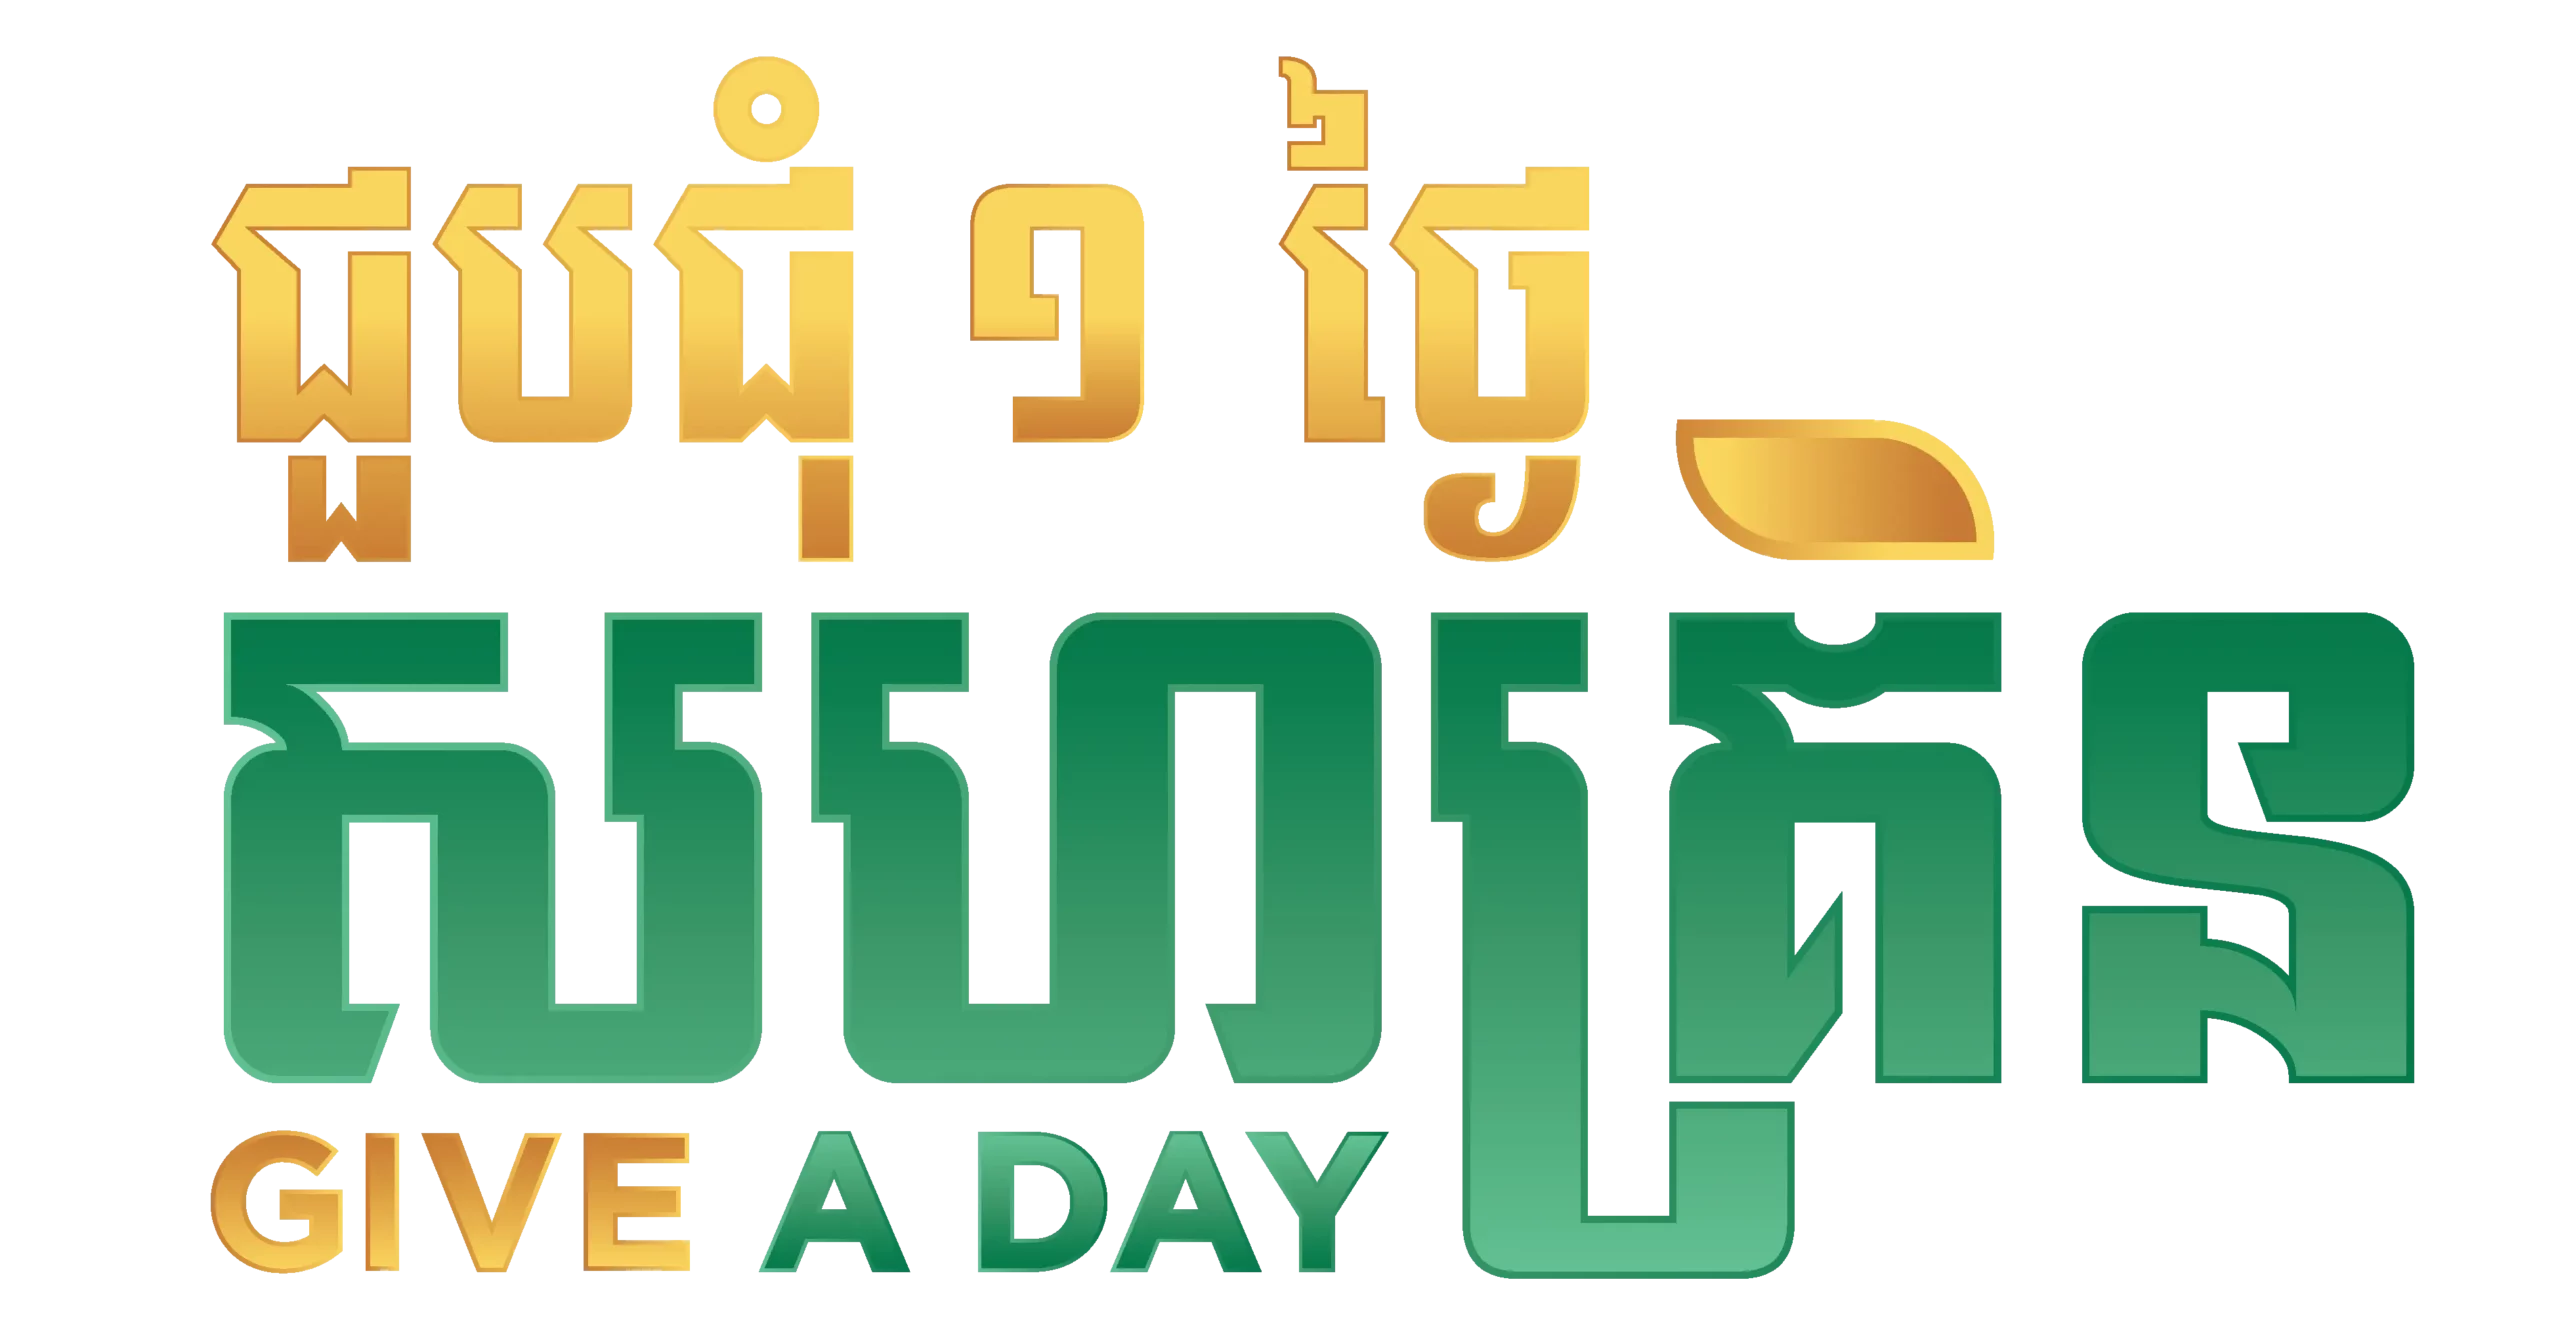 Give a day logo_new design_Final1-02